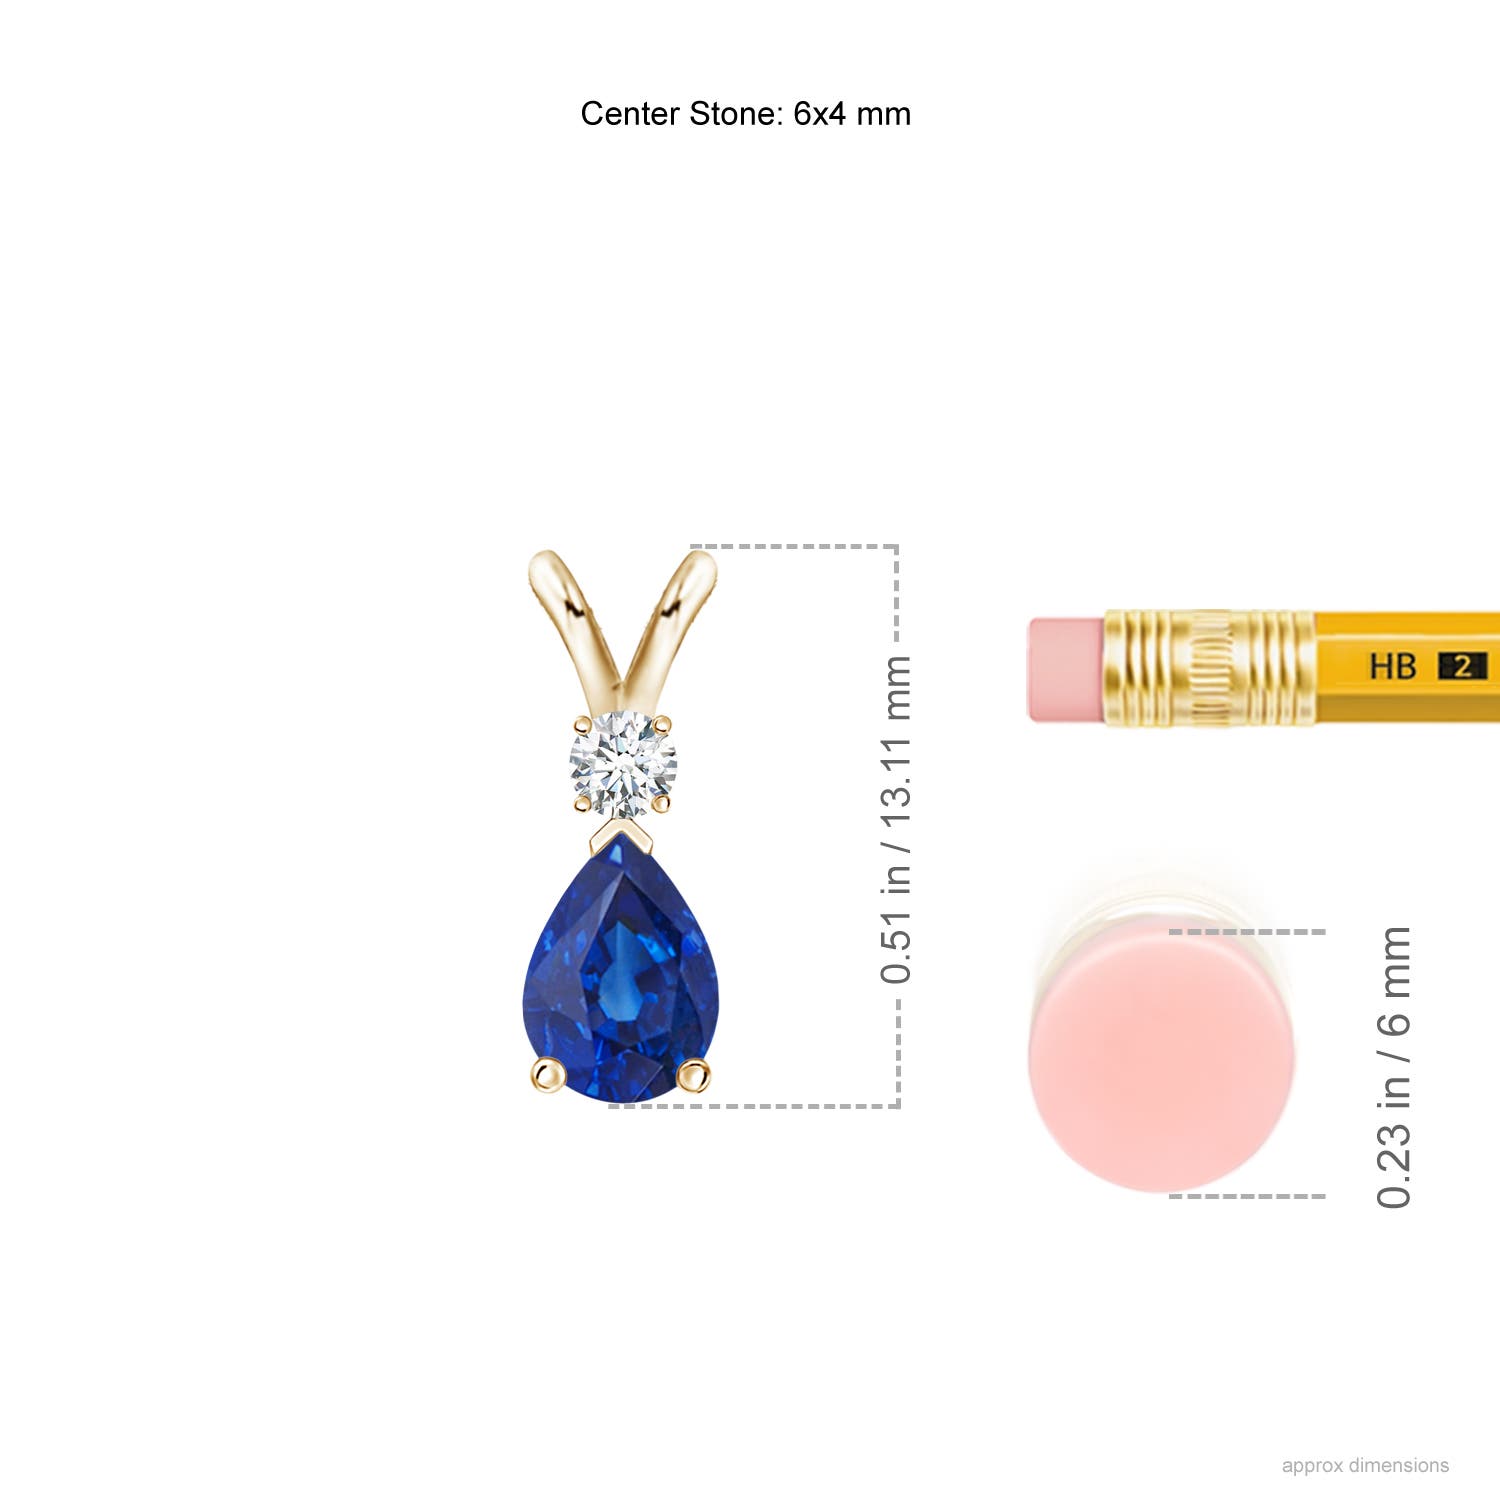 AAA- Blue Sapphire / 0.44 CT / 14 KT Yellow Gold